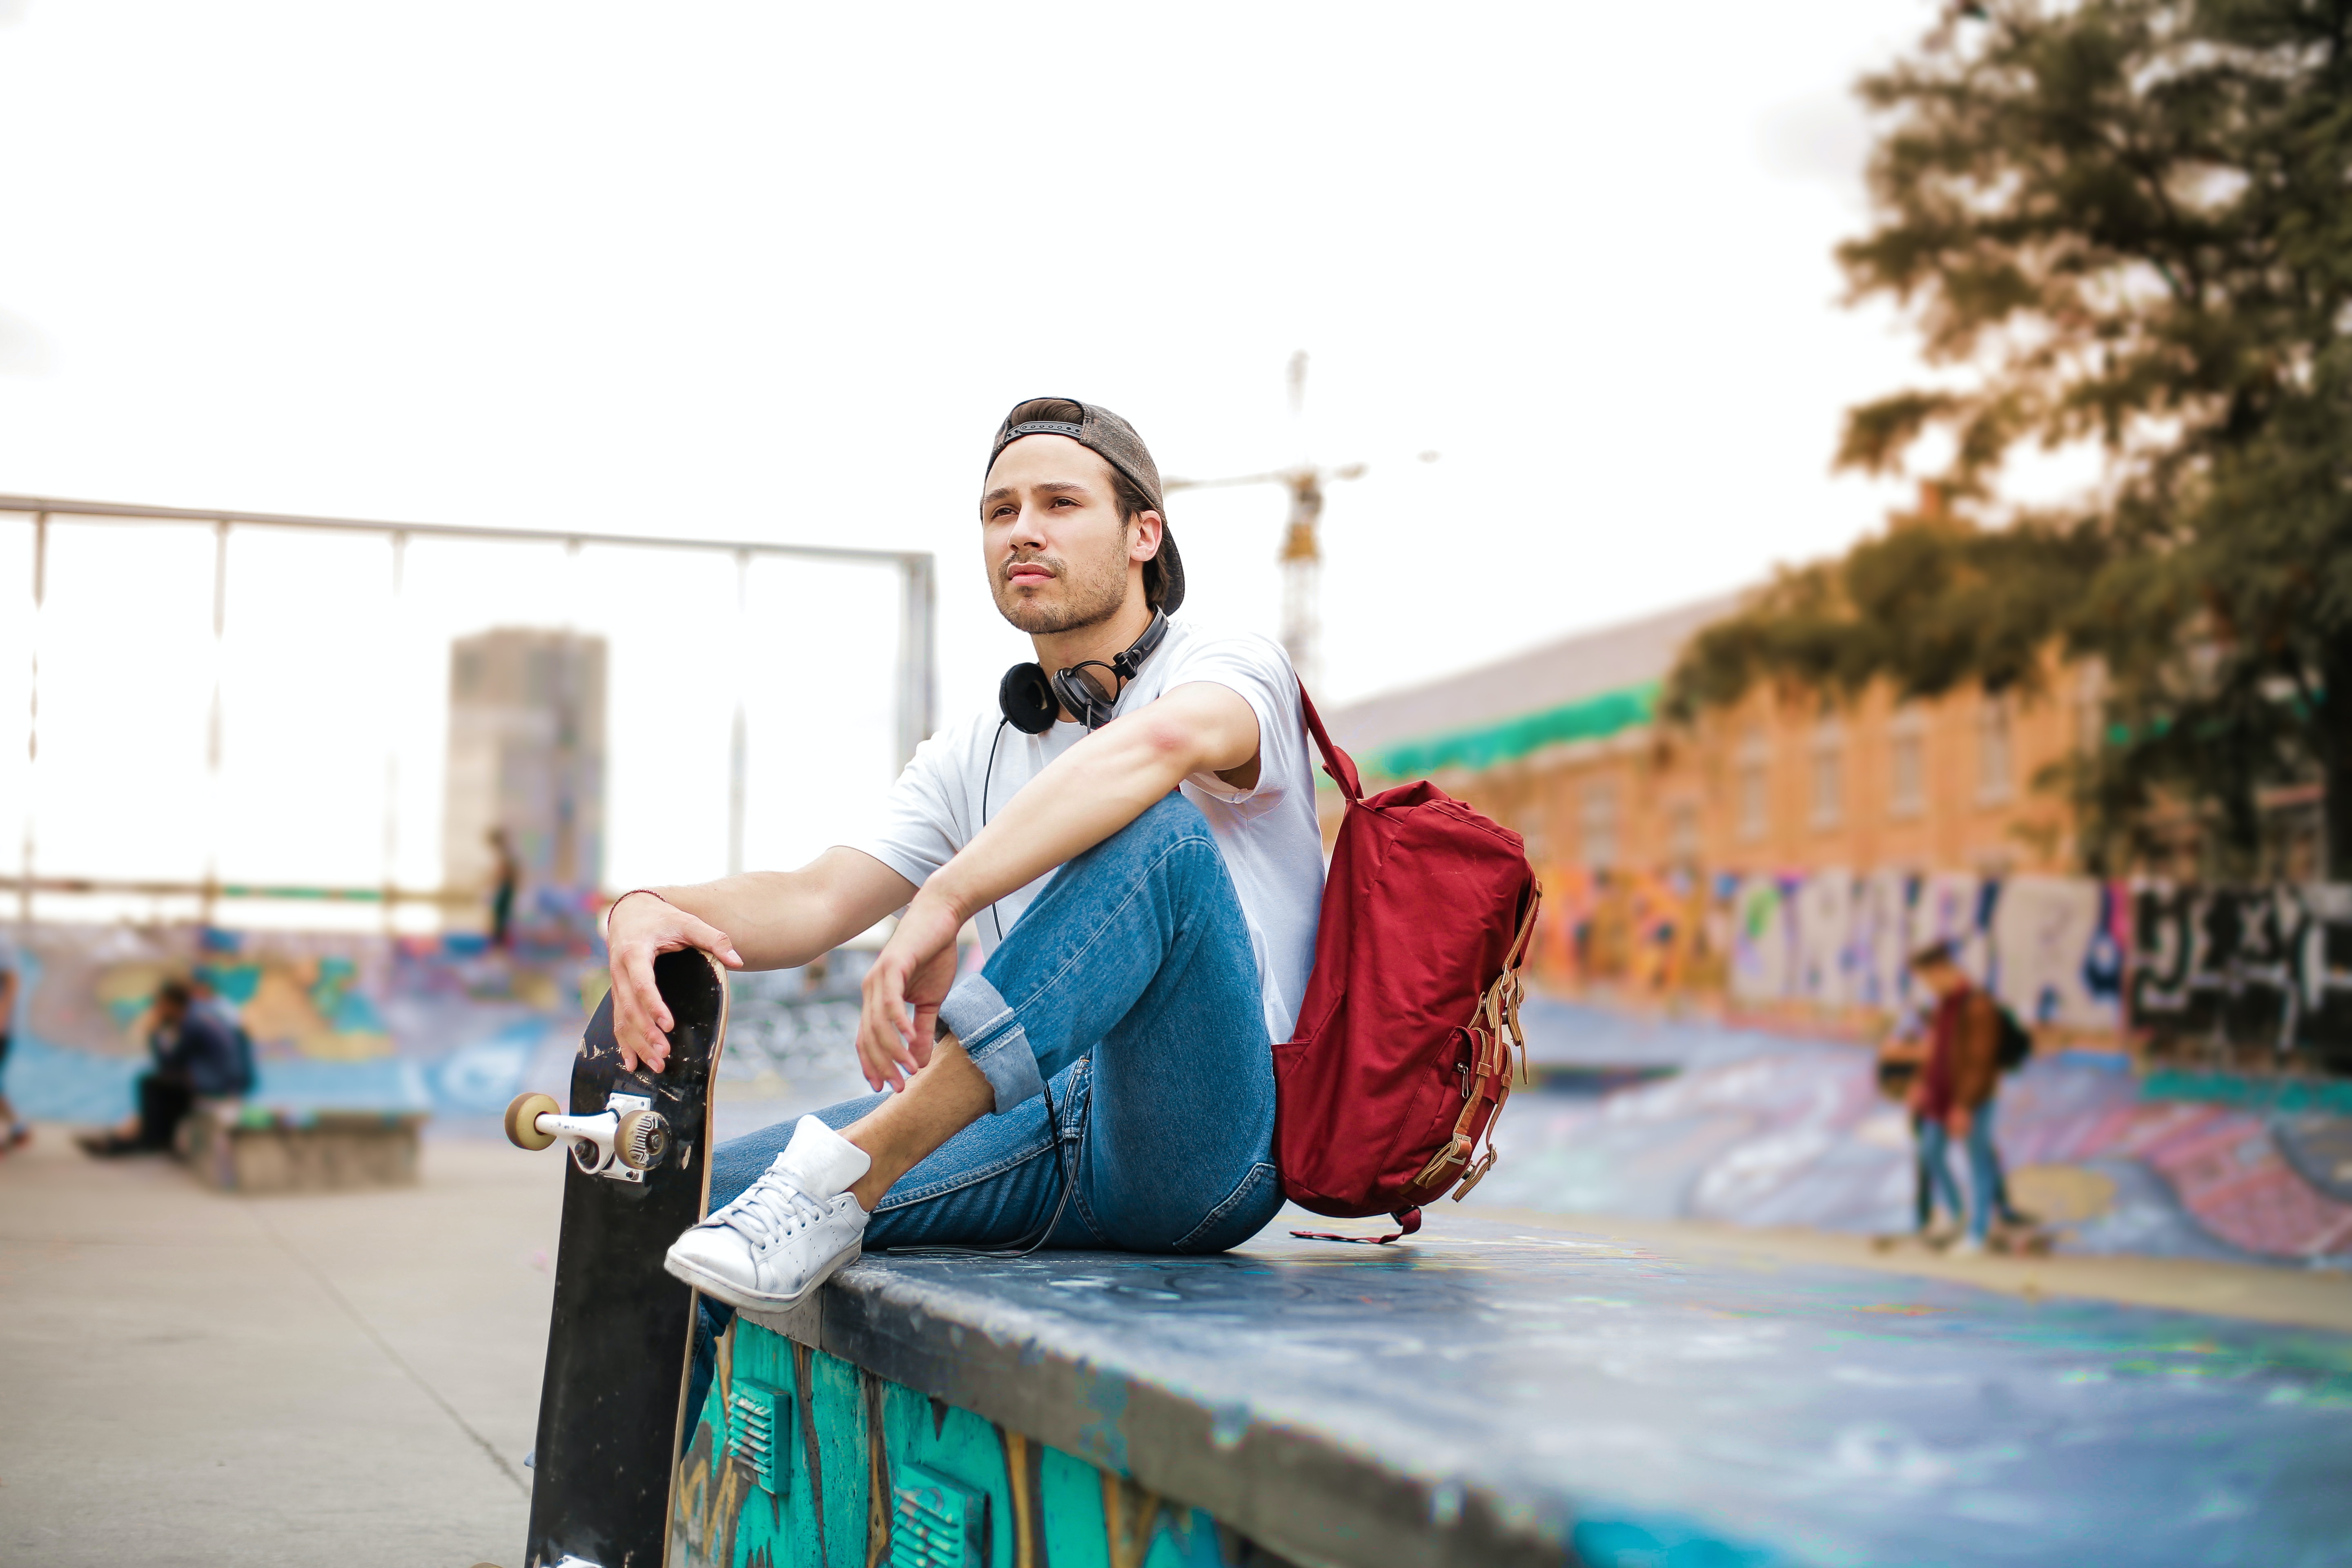 Man in shite shirt, blue jeans and red backpack, sitting down holding a skateboard